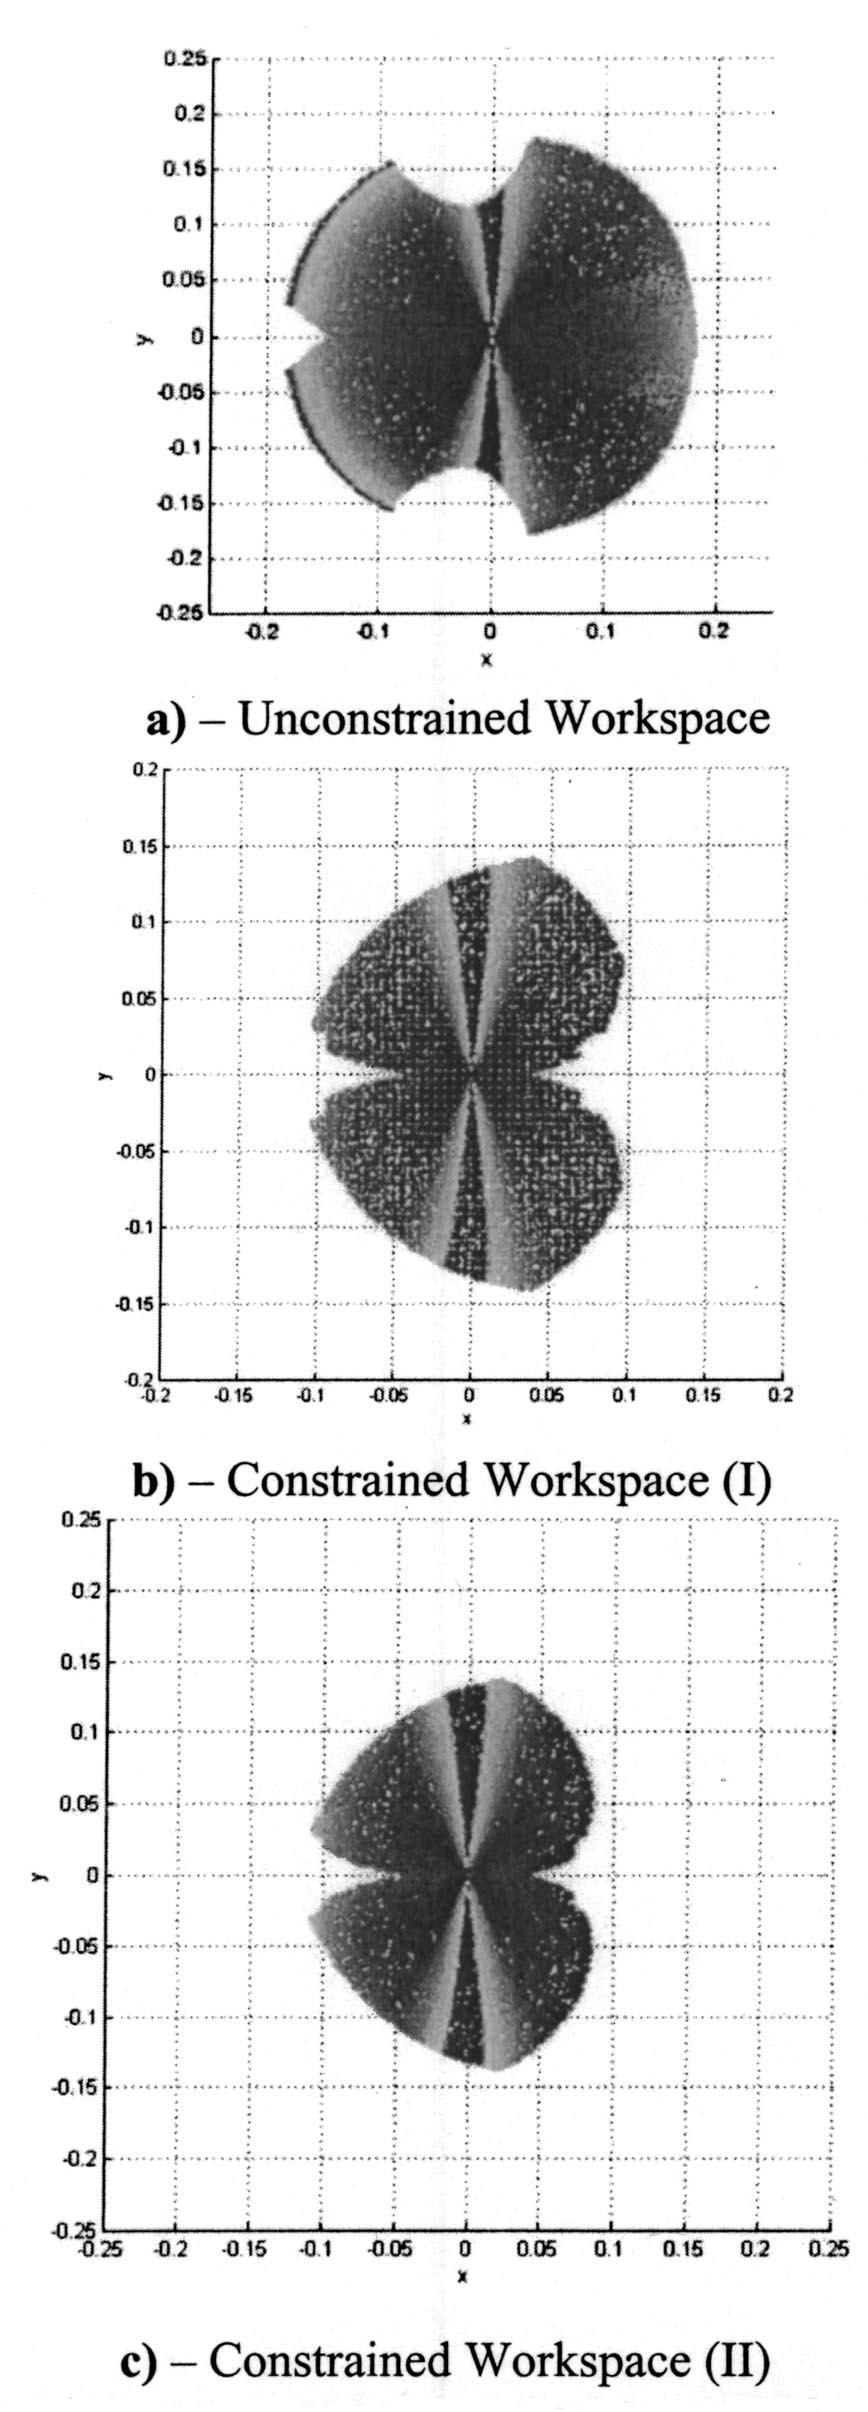 The limits for the spherical joint angles were set the same, at 65 deg. The optimal design parameters that were obtained are: stroke 71%, c i 0.62, h 0.44 and h ab 1.75.